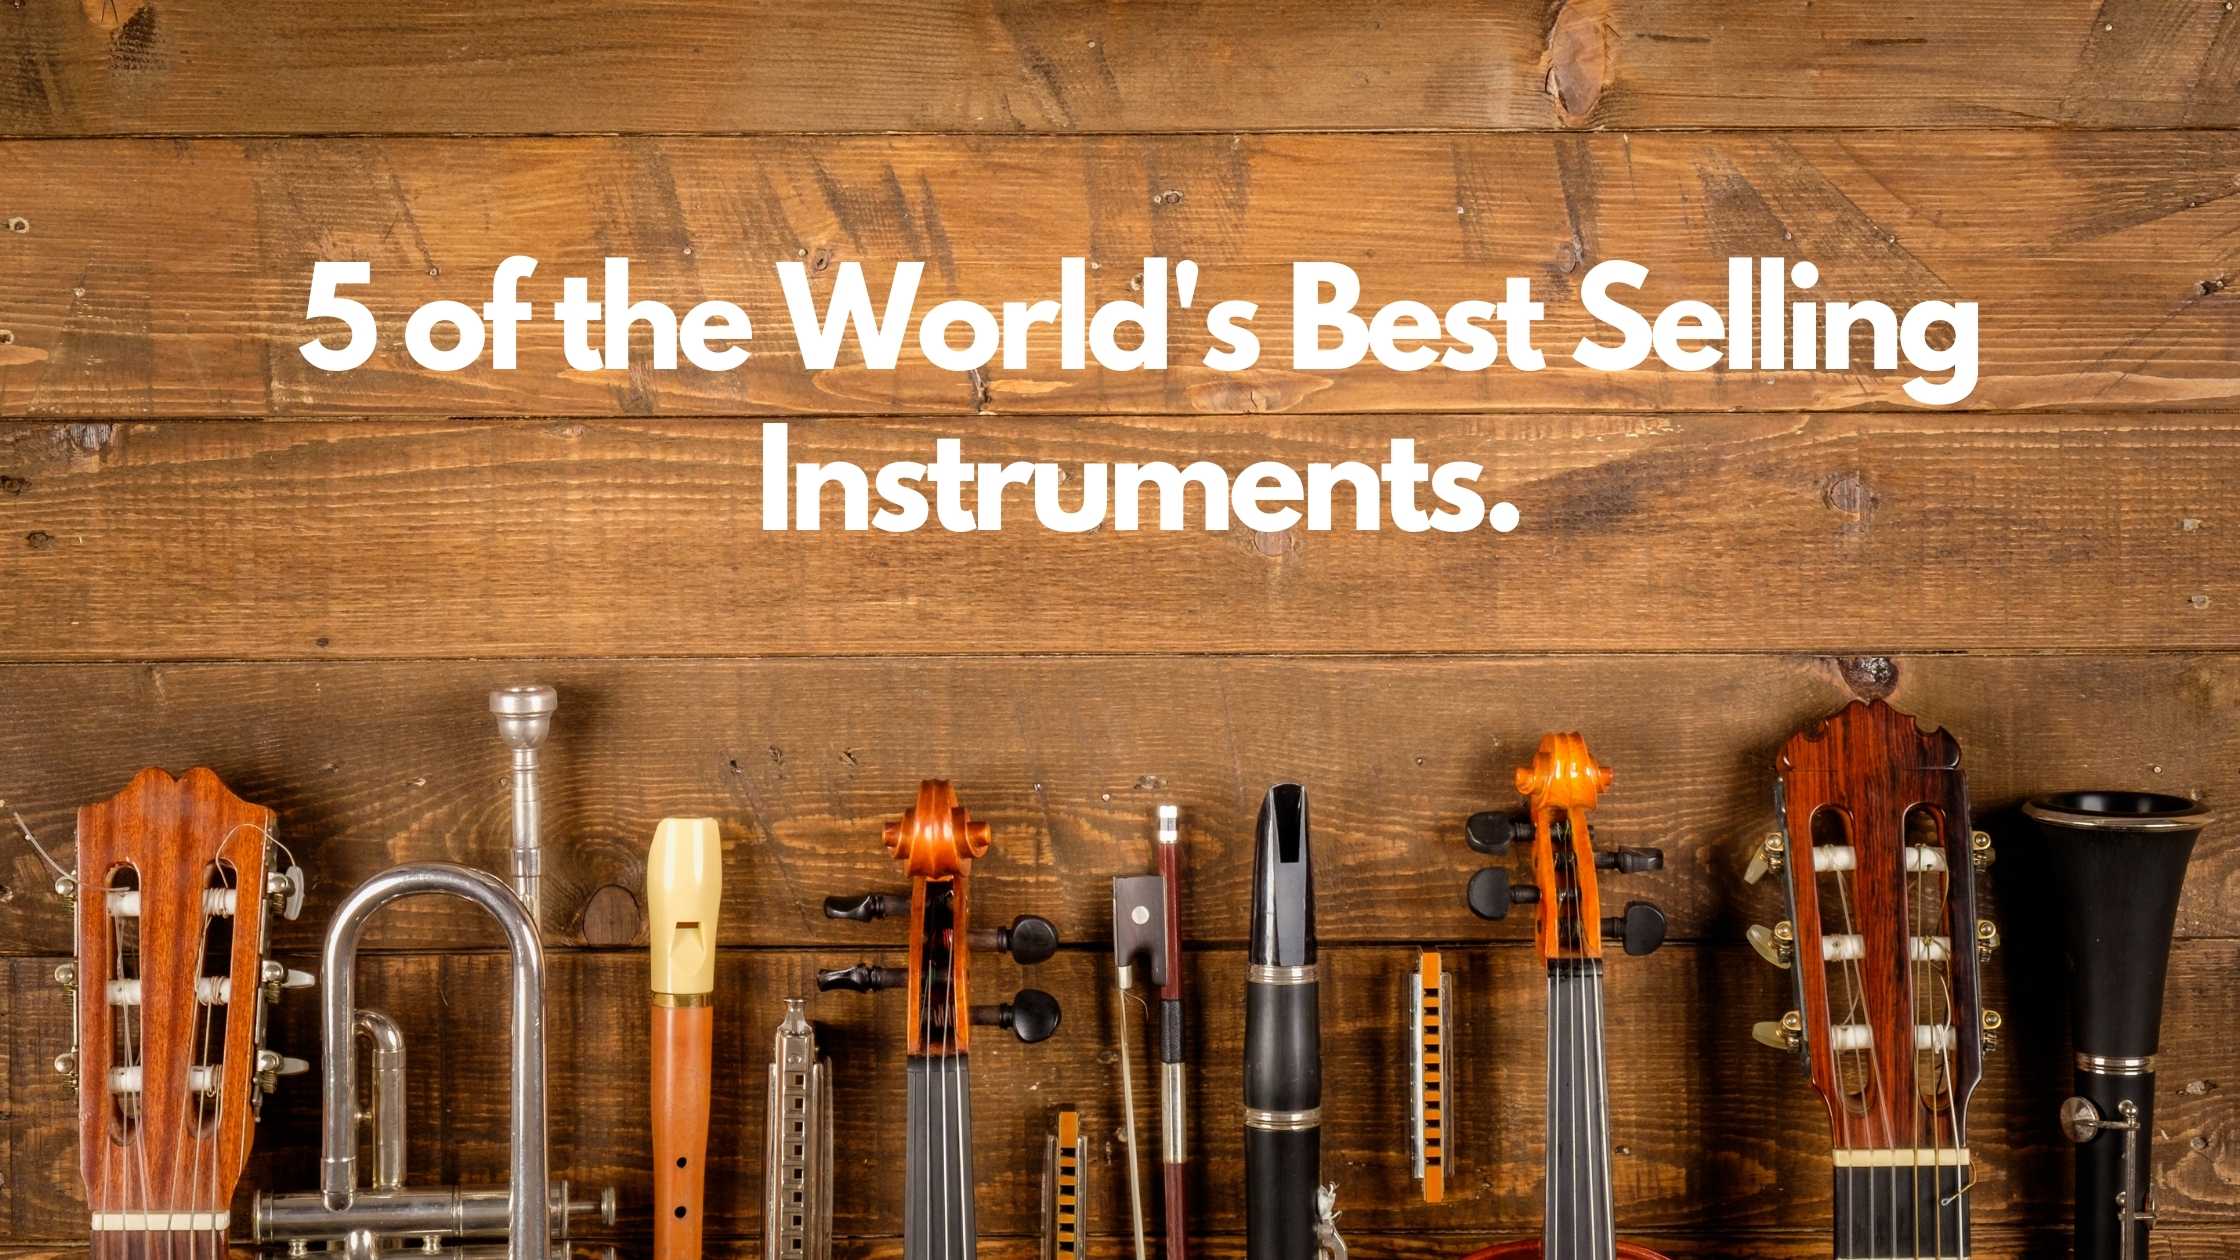 5 of the World's Best Selling Instruments